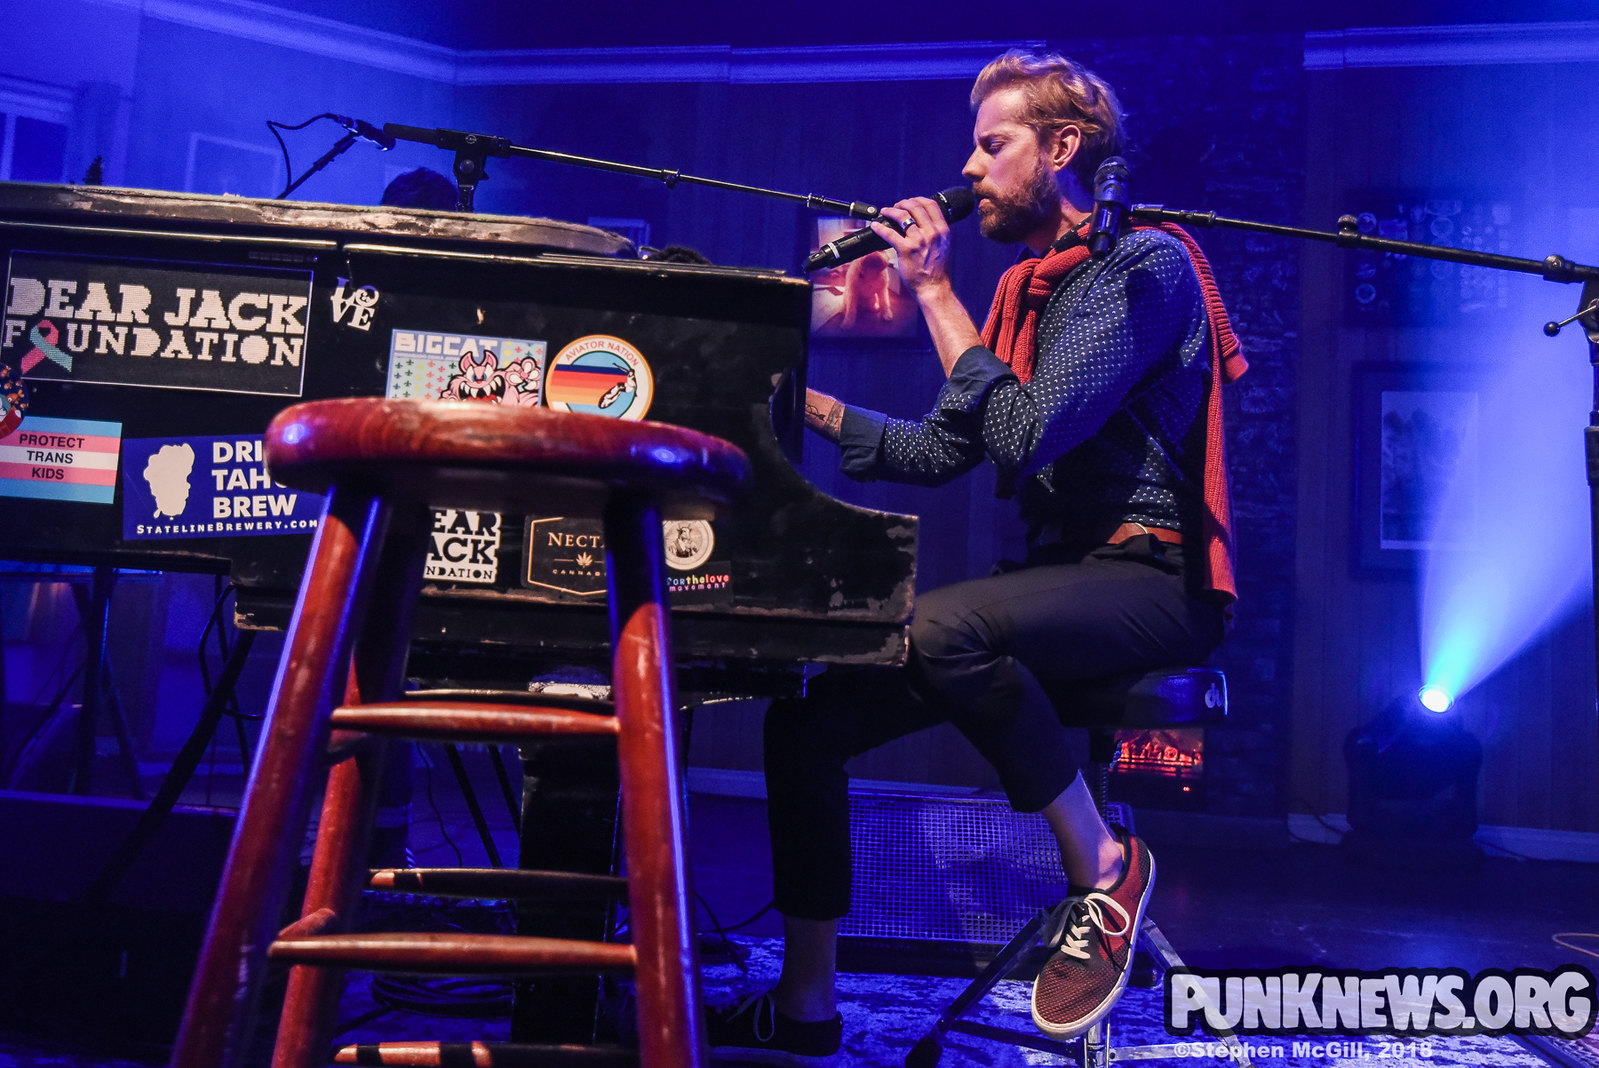 Andrew McMahon in The Wilderness at The Danforth Music Hall, 05/31